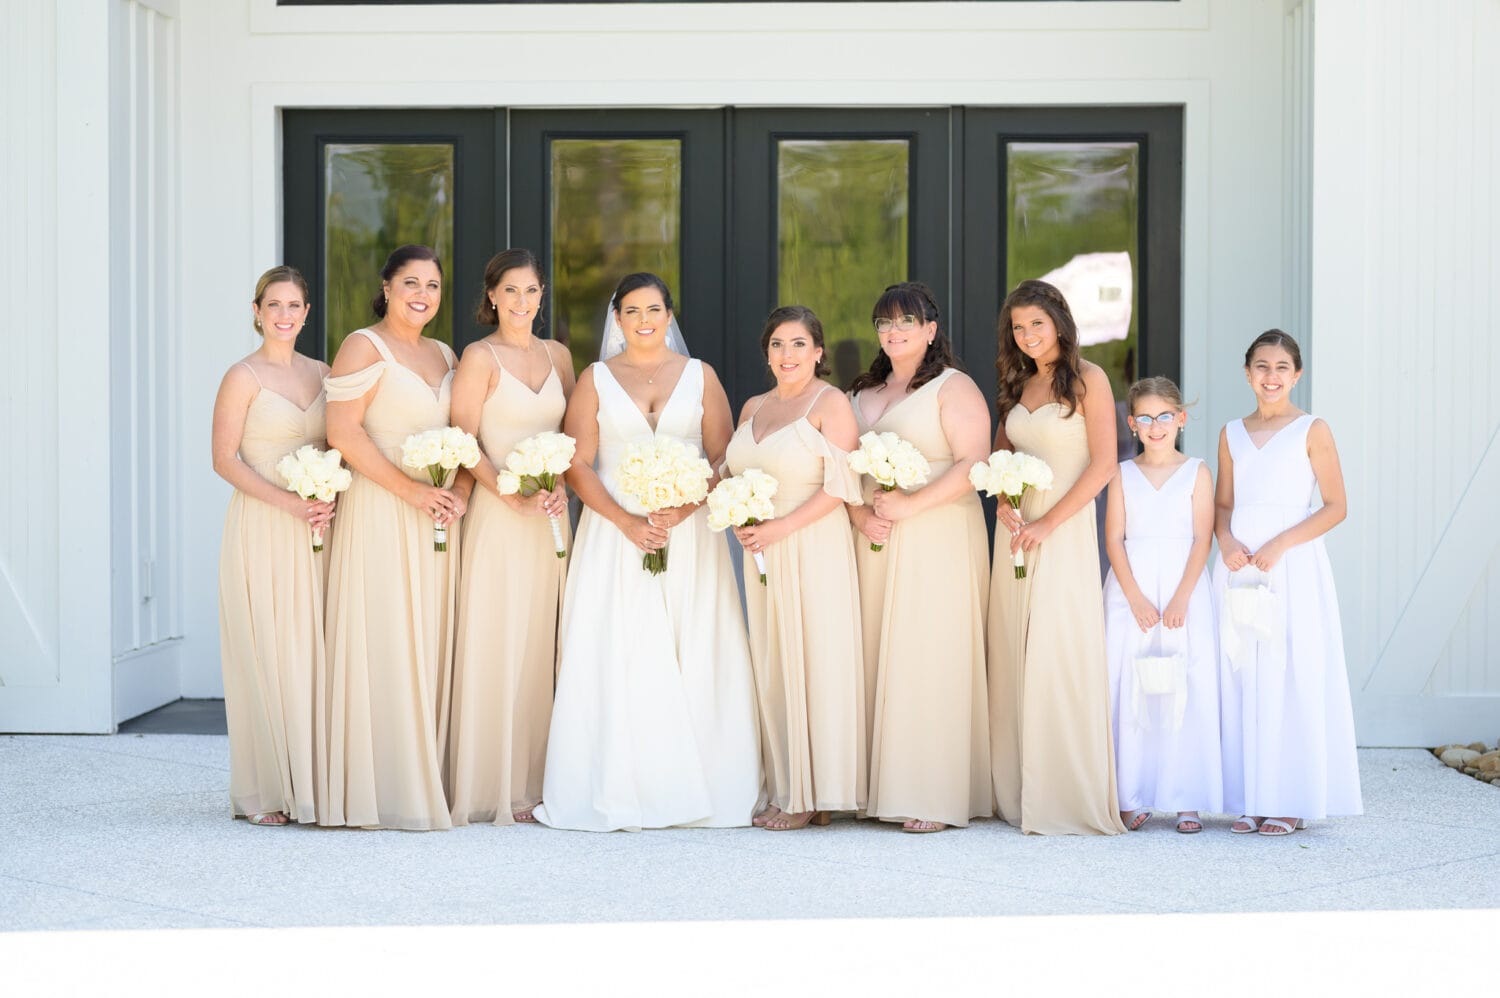 Bridesmaids in front of the entrance doors - The Venue at White Oaks Farm